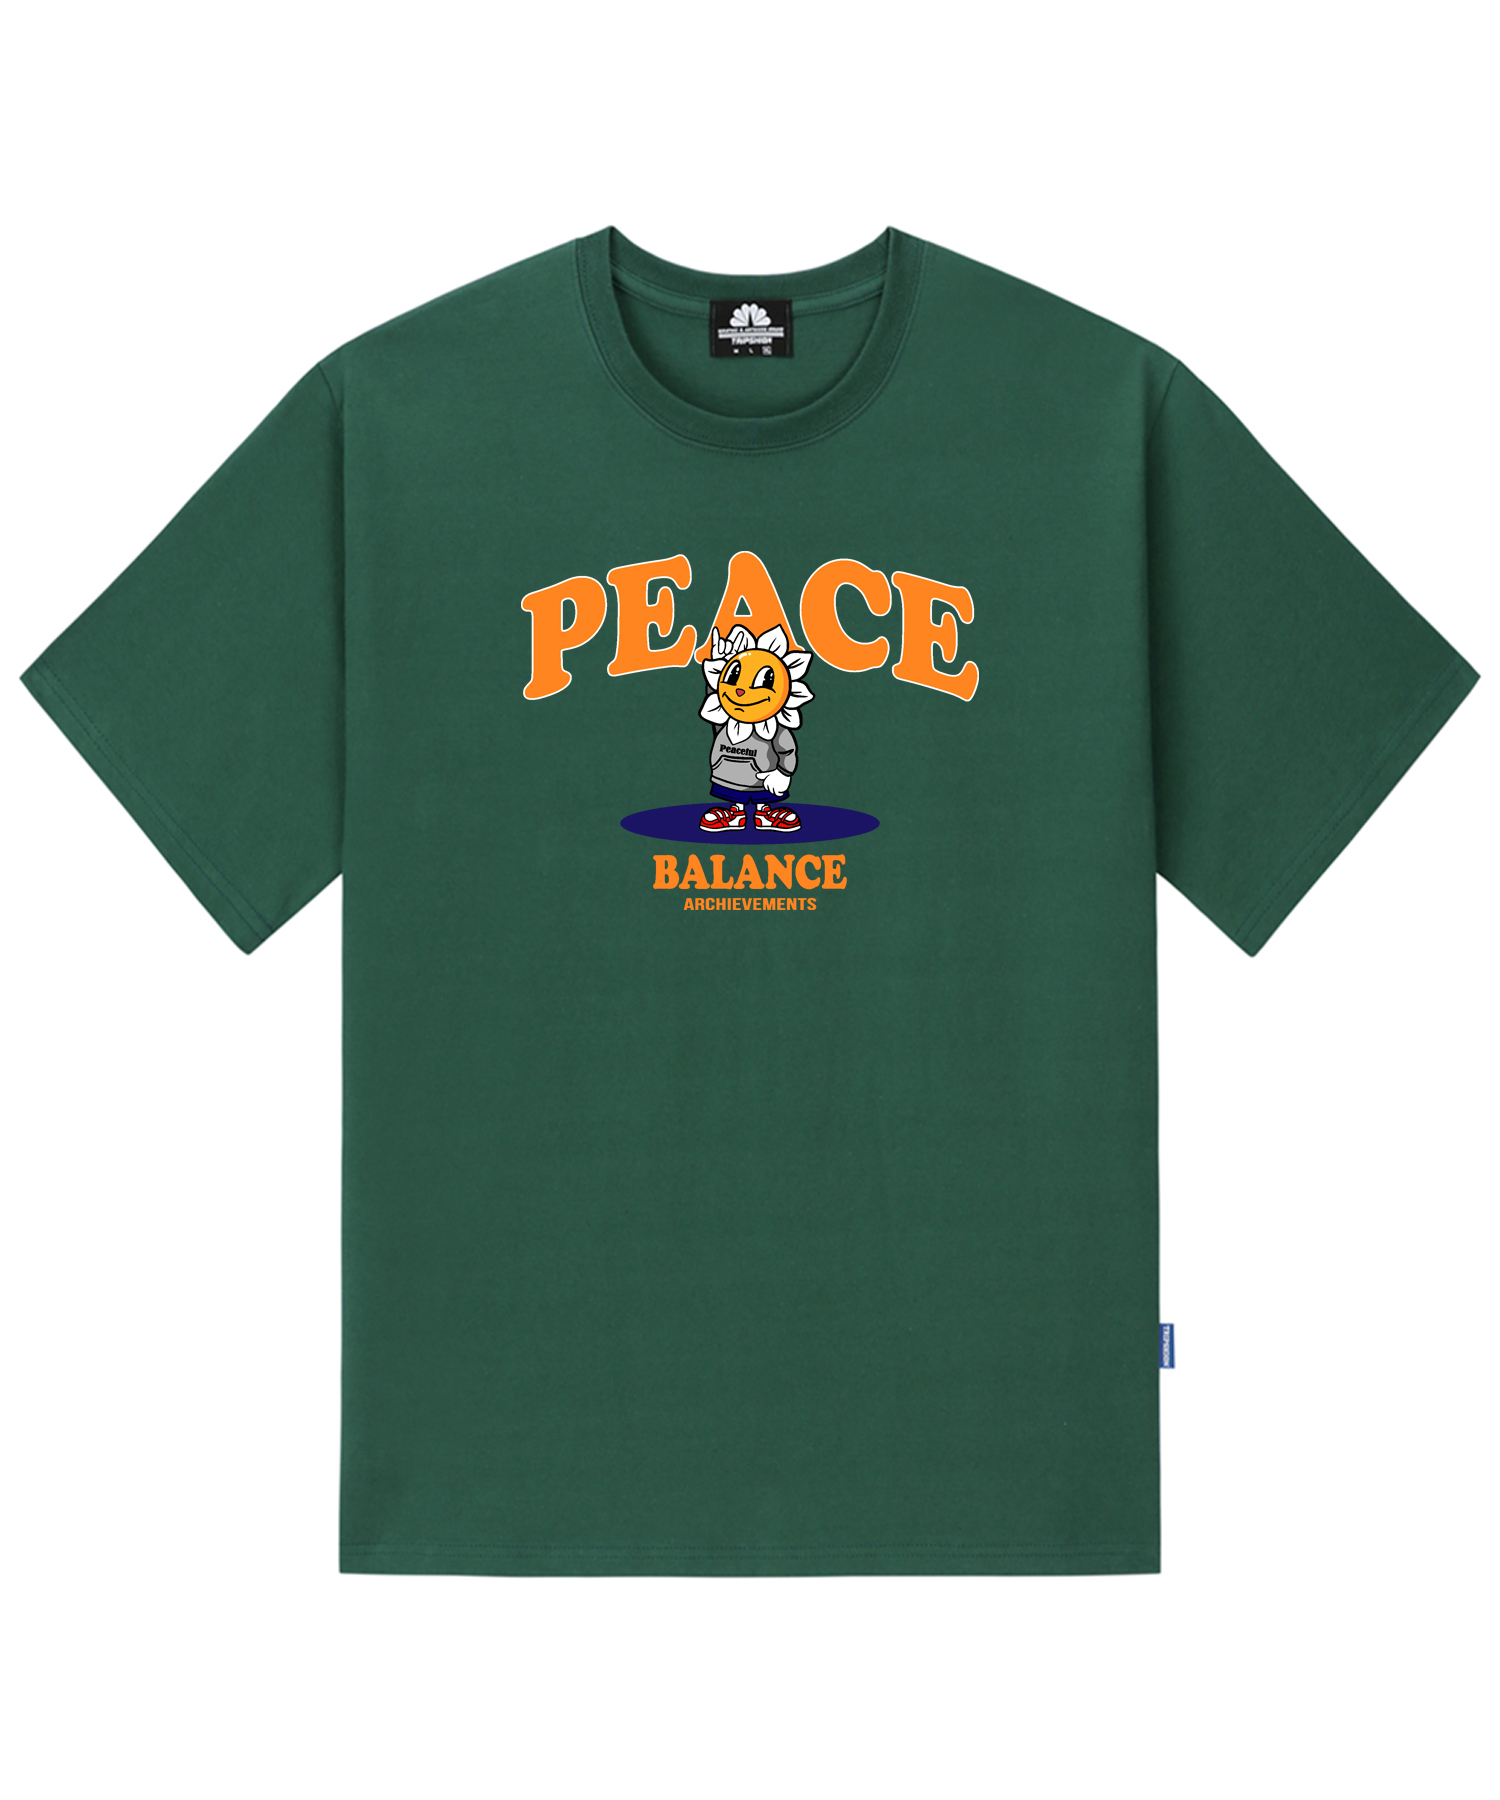 PEACE TIGER GRAPHIC T-SHIRTS - GREEN